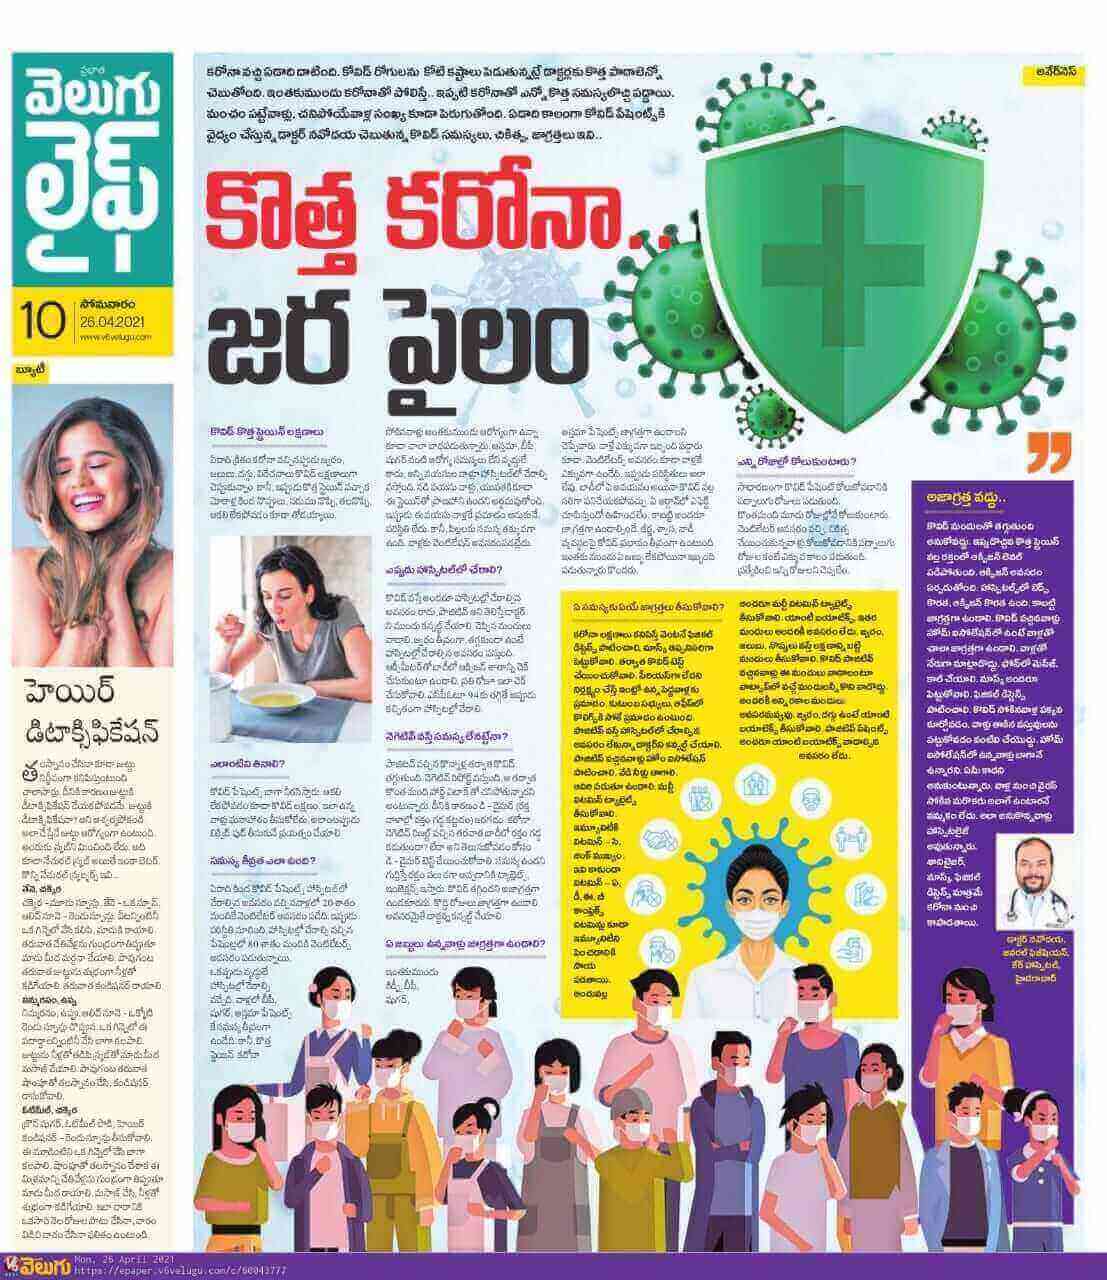 Article on COVID-19 New Symptoms and Treatment by Dr. Navodaya Gilla - Consultant General Medicine